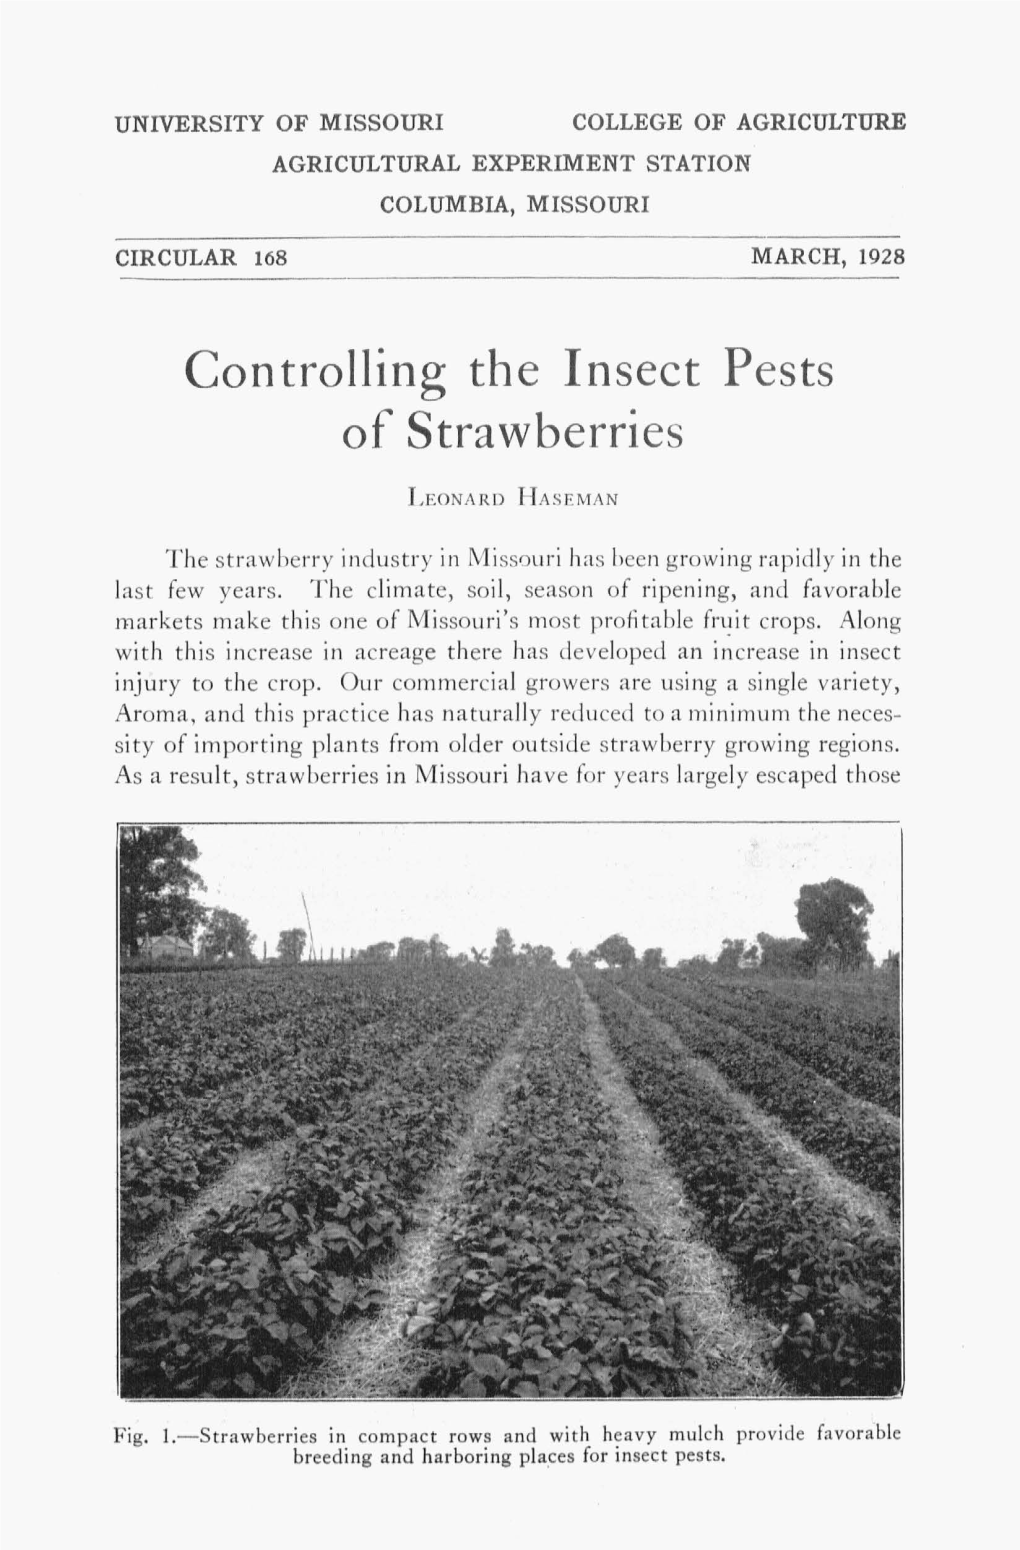 Controlling the Insect Pests of Strawberries